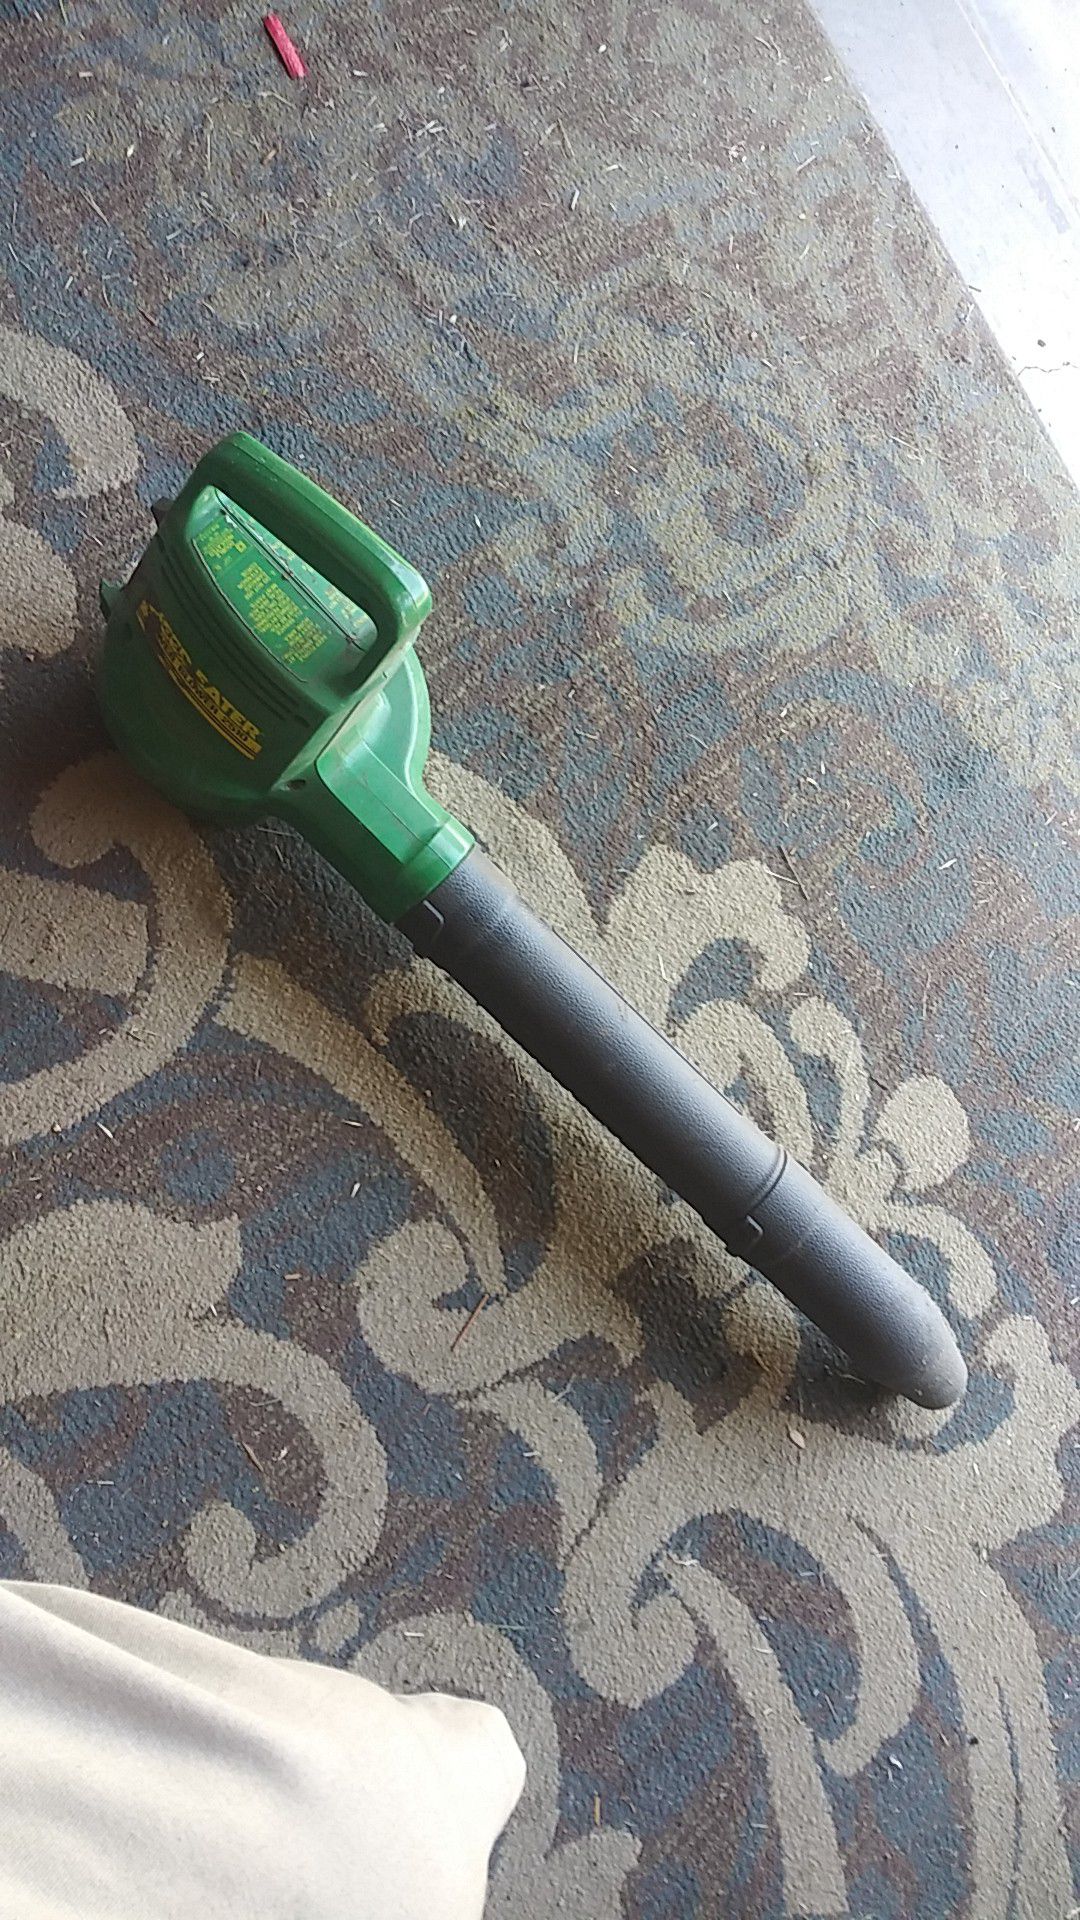 Weed eater Electric power blower #2510# $5 bucks makes rattling while you use it but still works